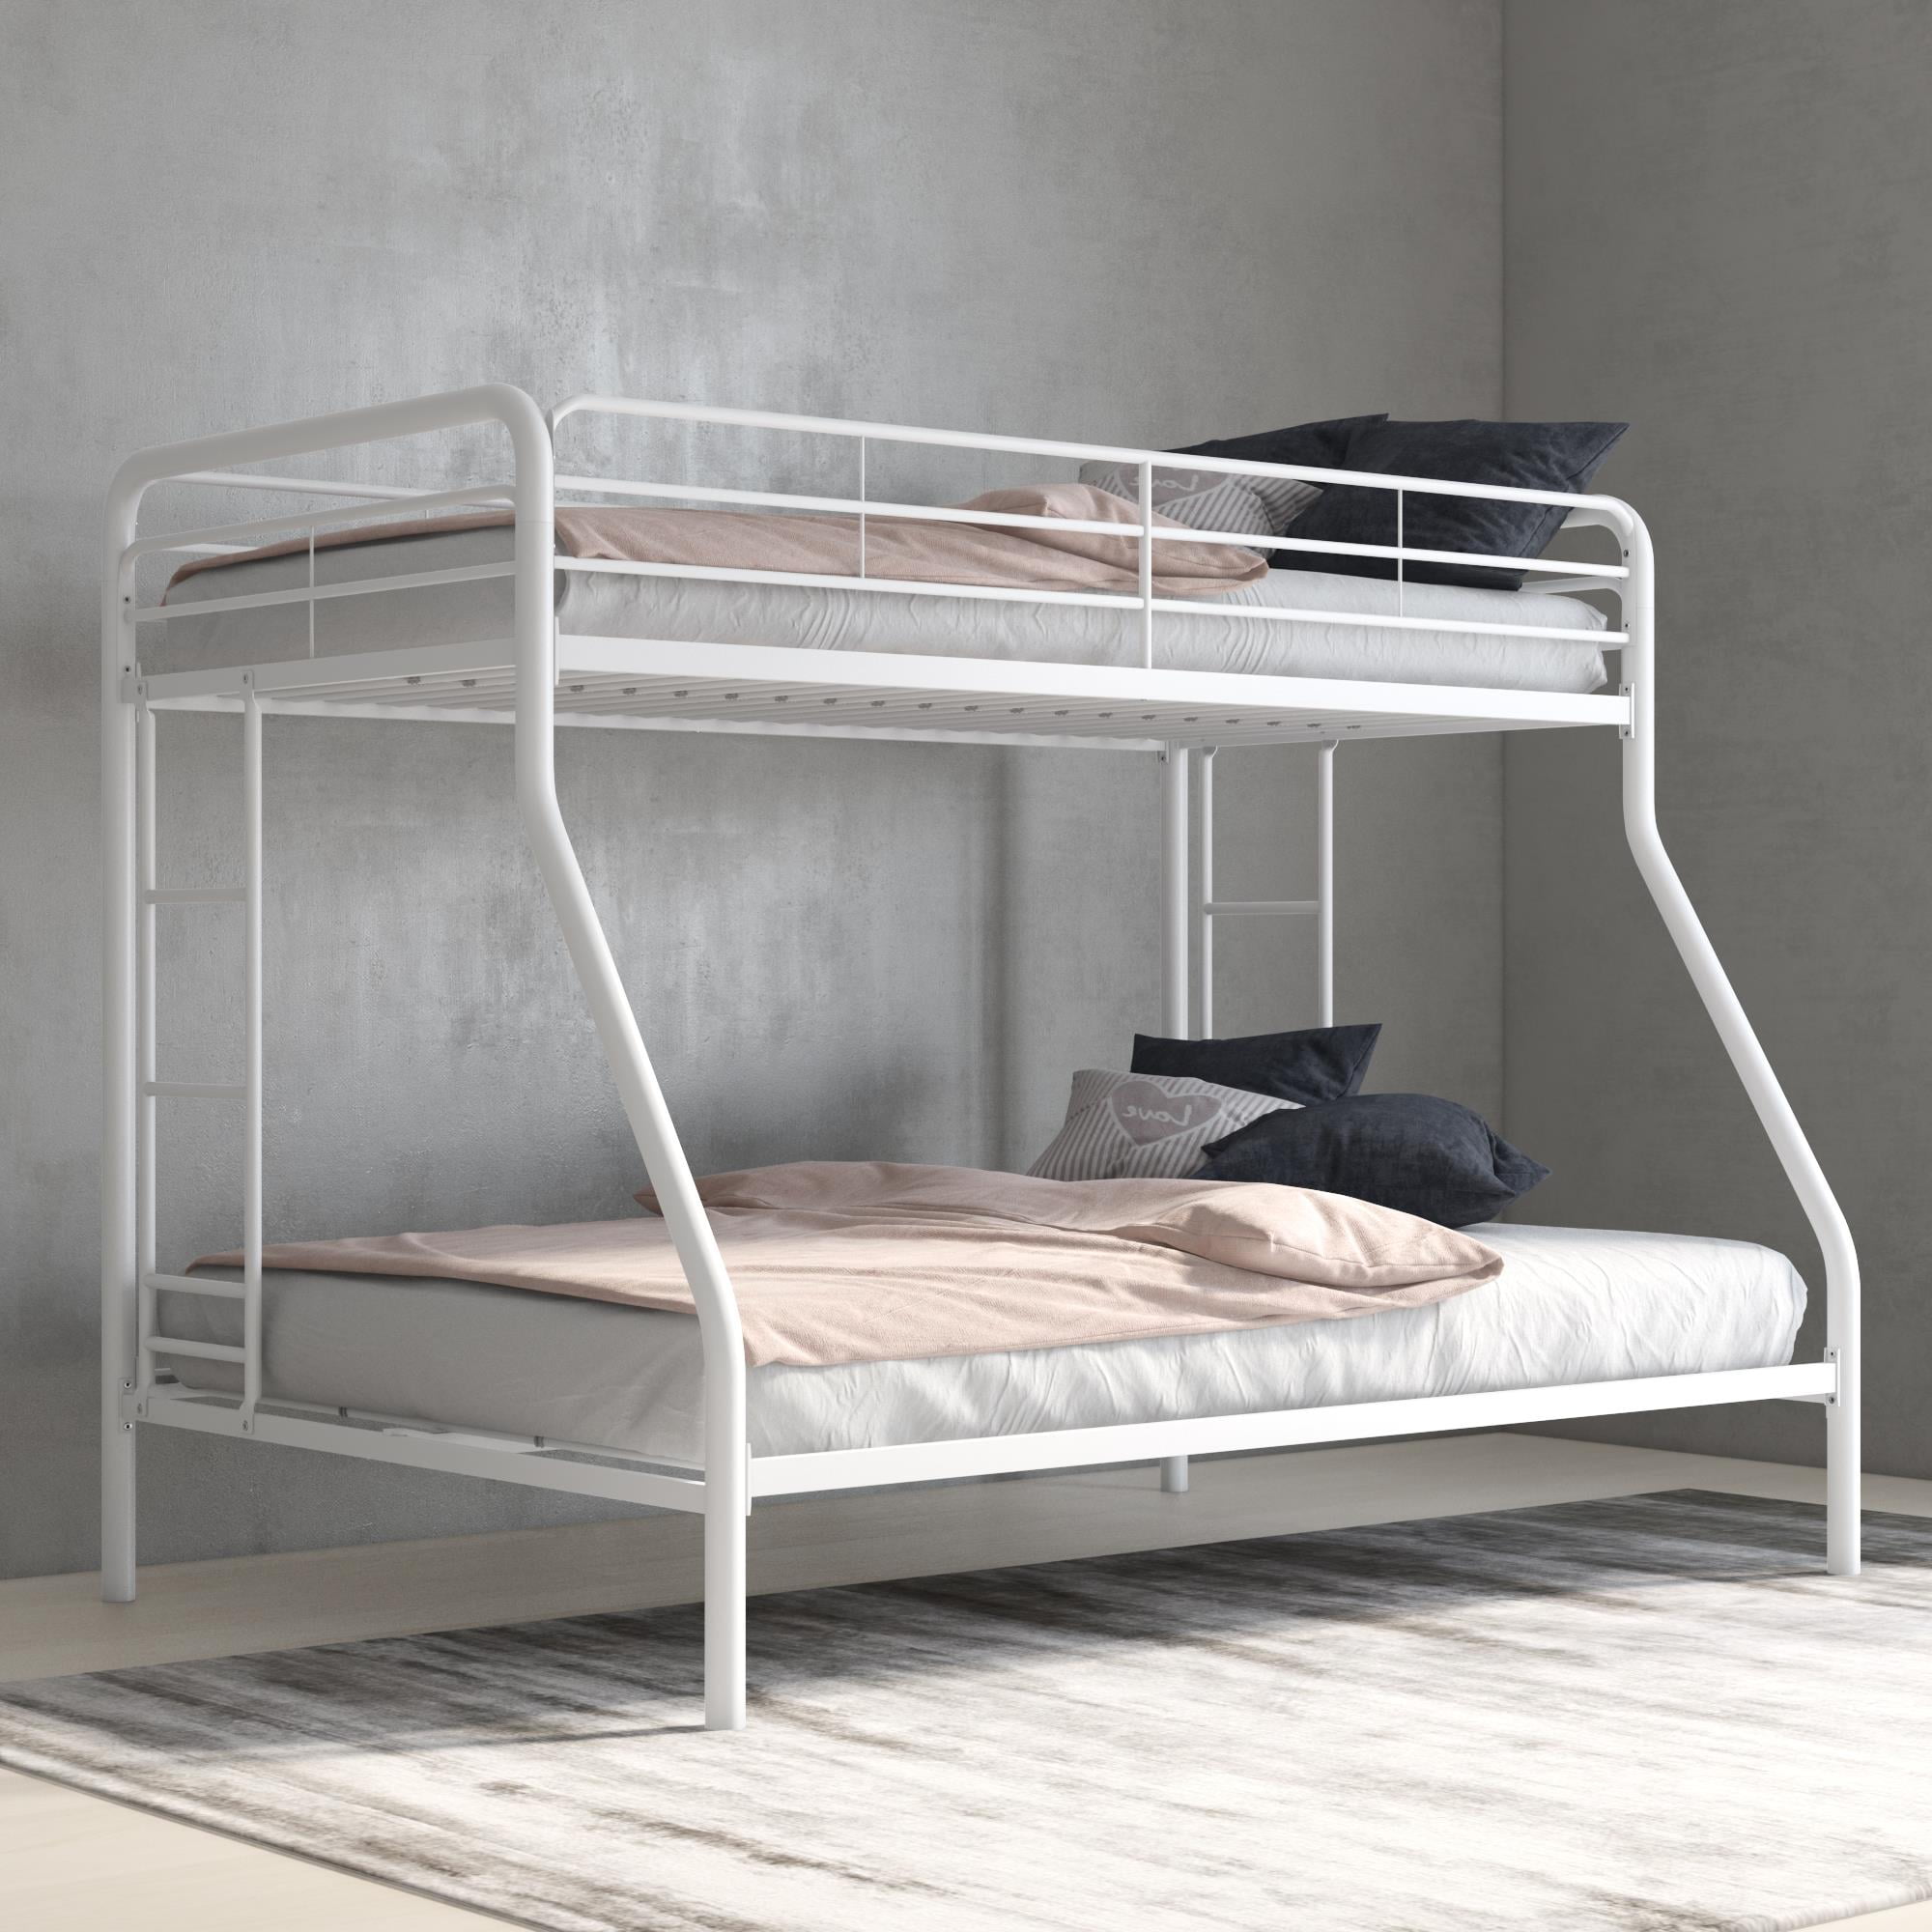 Dhp Twin Over Full Metal Bunk Bed Frame, Full Over Full Bunk Bed Frame